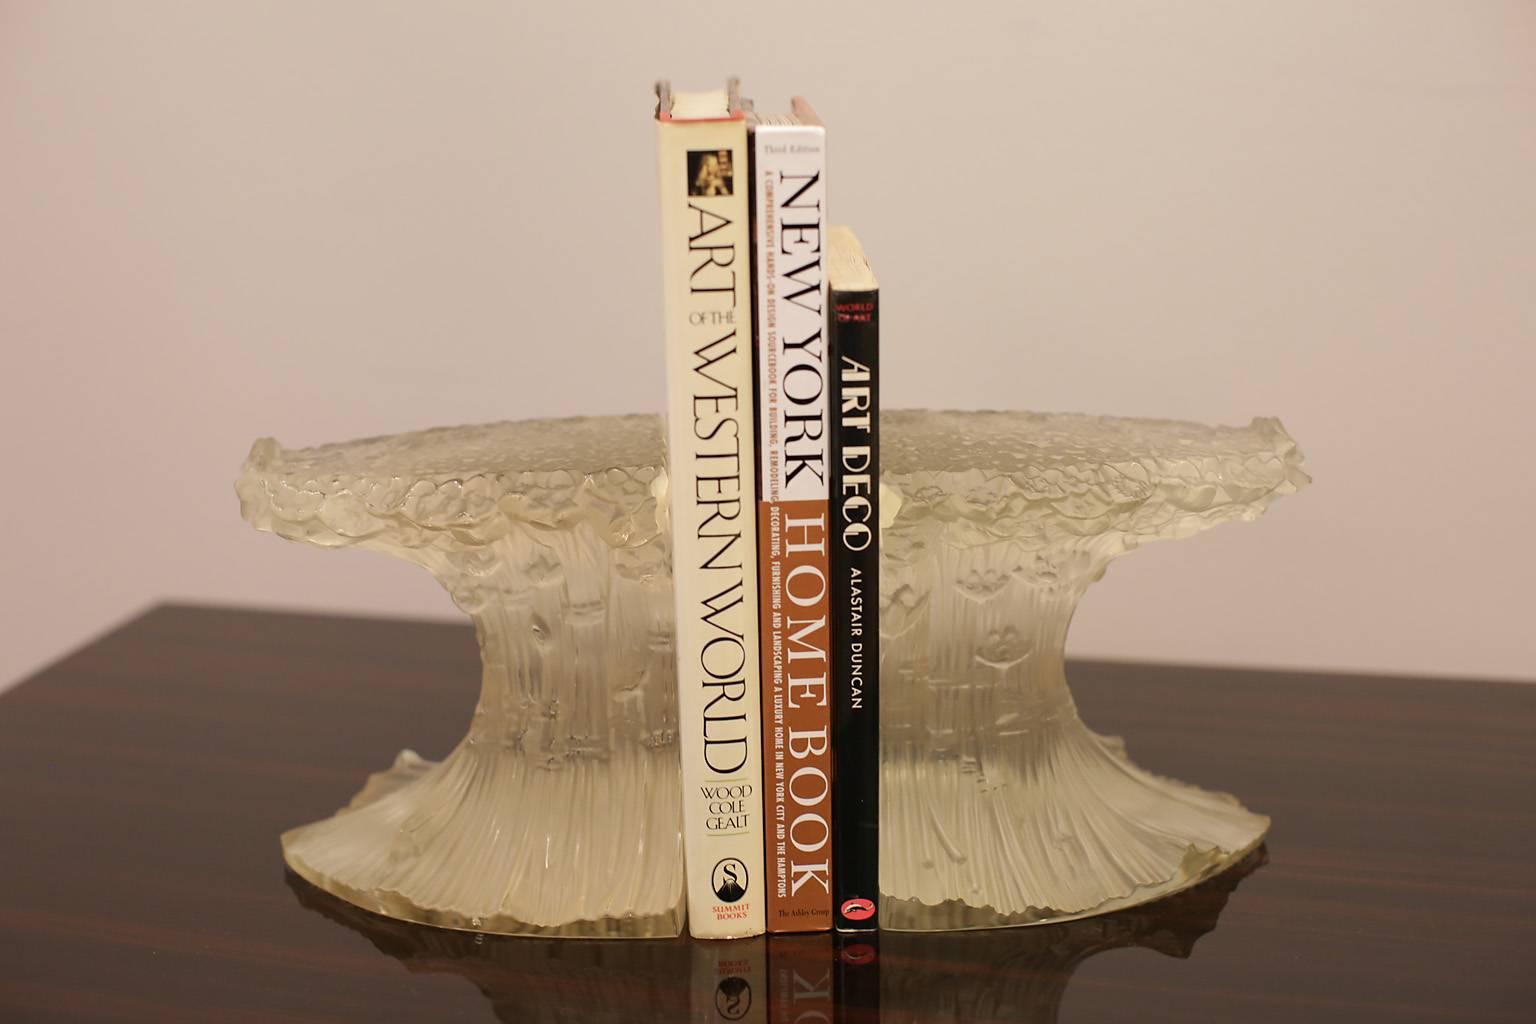 Pair of Art Deco glass bookends. Two pairs are available. Each pair is priced and sold separately. $800.00 per pair.